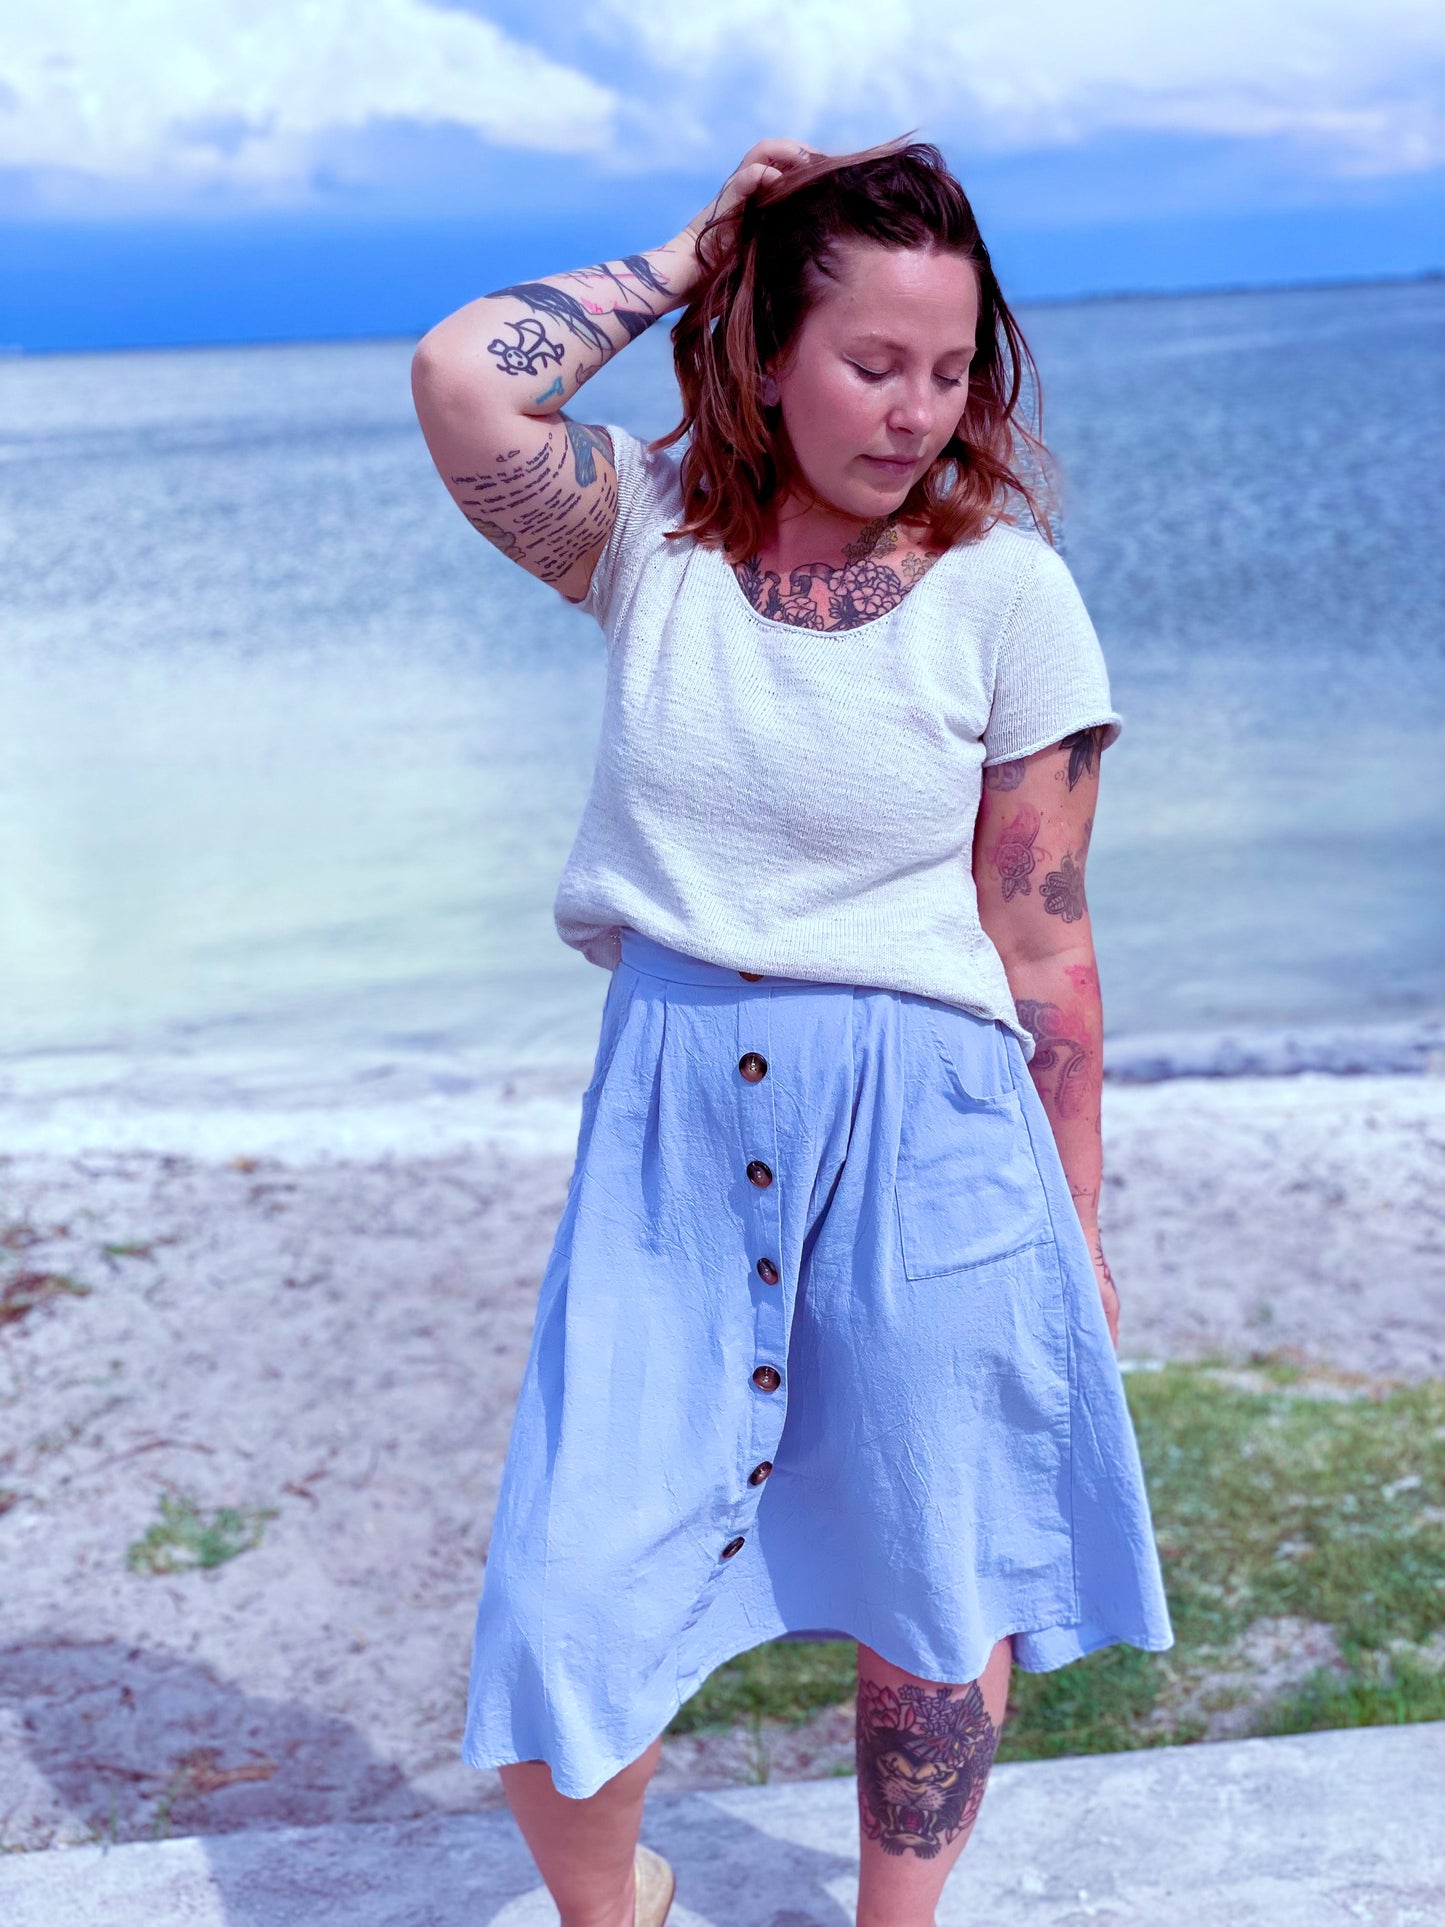 Bess stands, a body of water behind her, wearing a white knit tee with a light blue midi skirt.